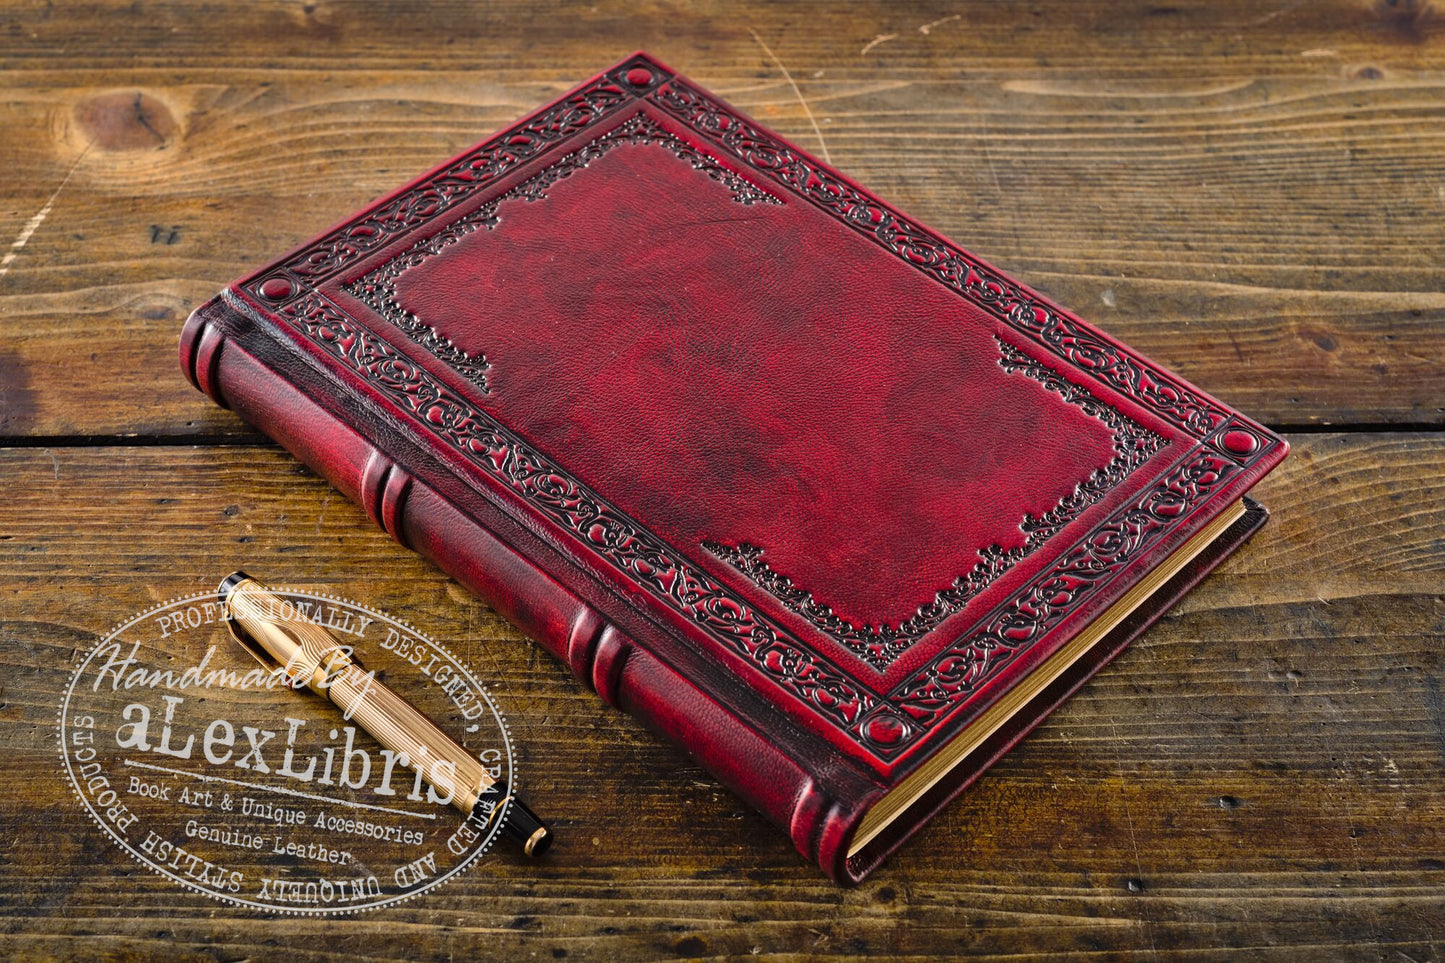 Elegant Leather Agenda: Large 8 x 10 Inches, 260 Blank Pages - Organize Your Days with Style and Elegance in this Antiqued Leather Journal